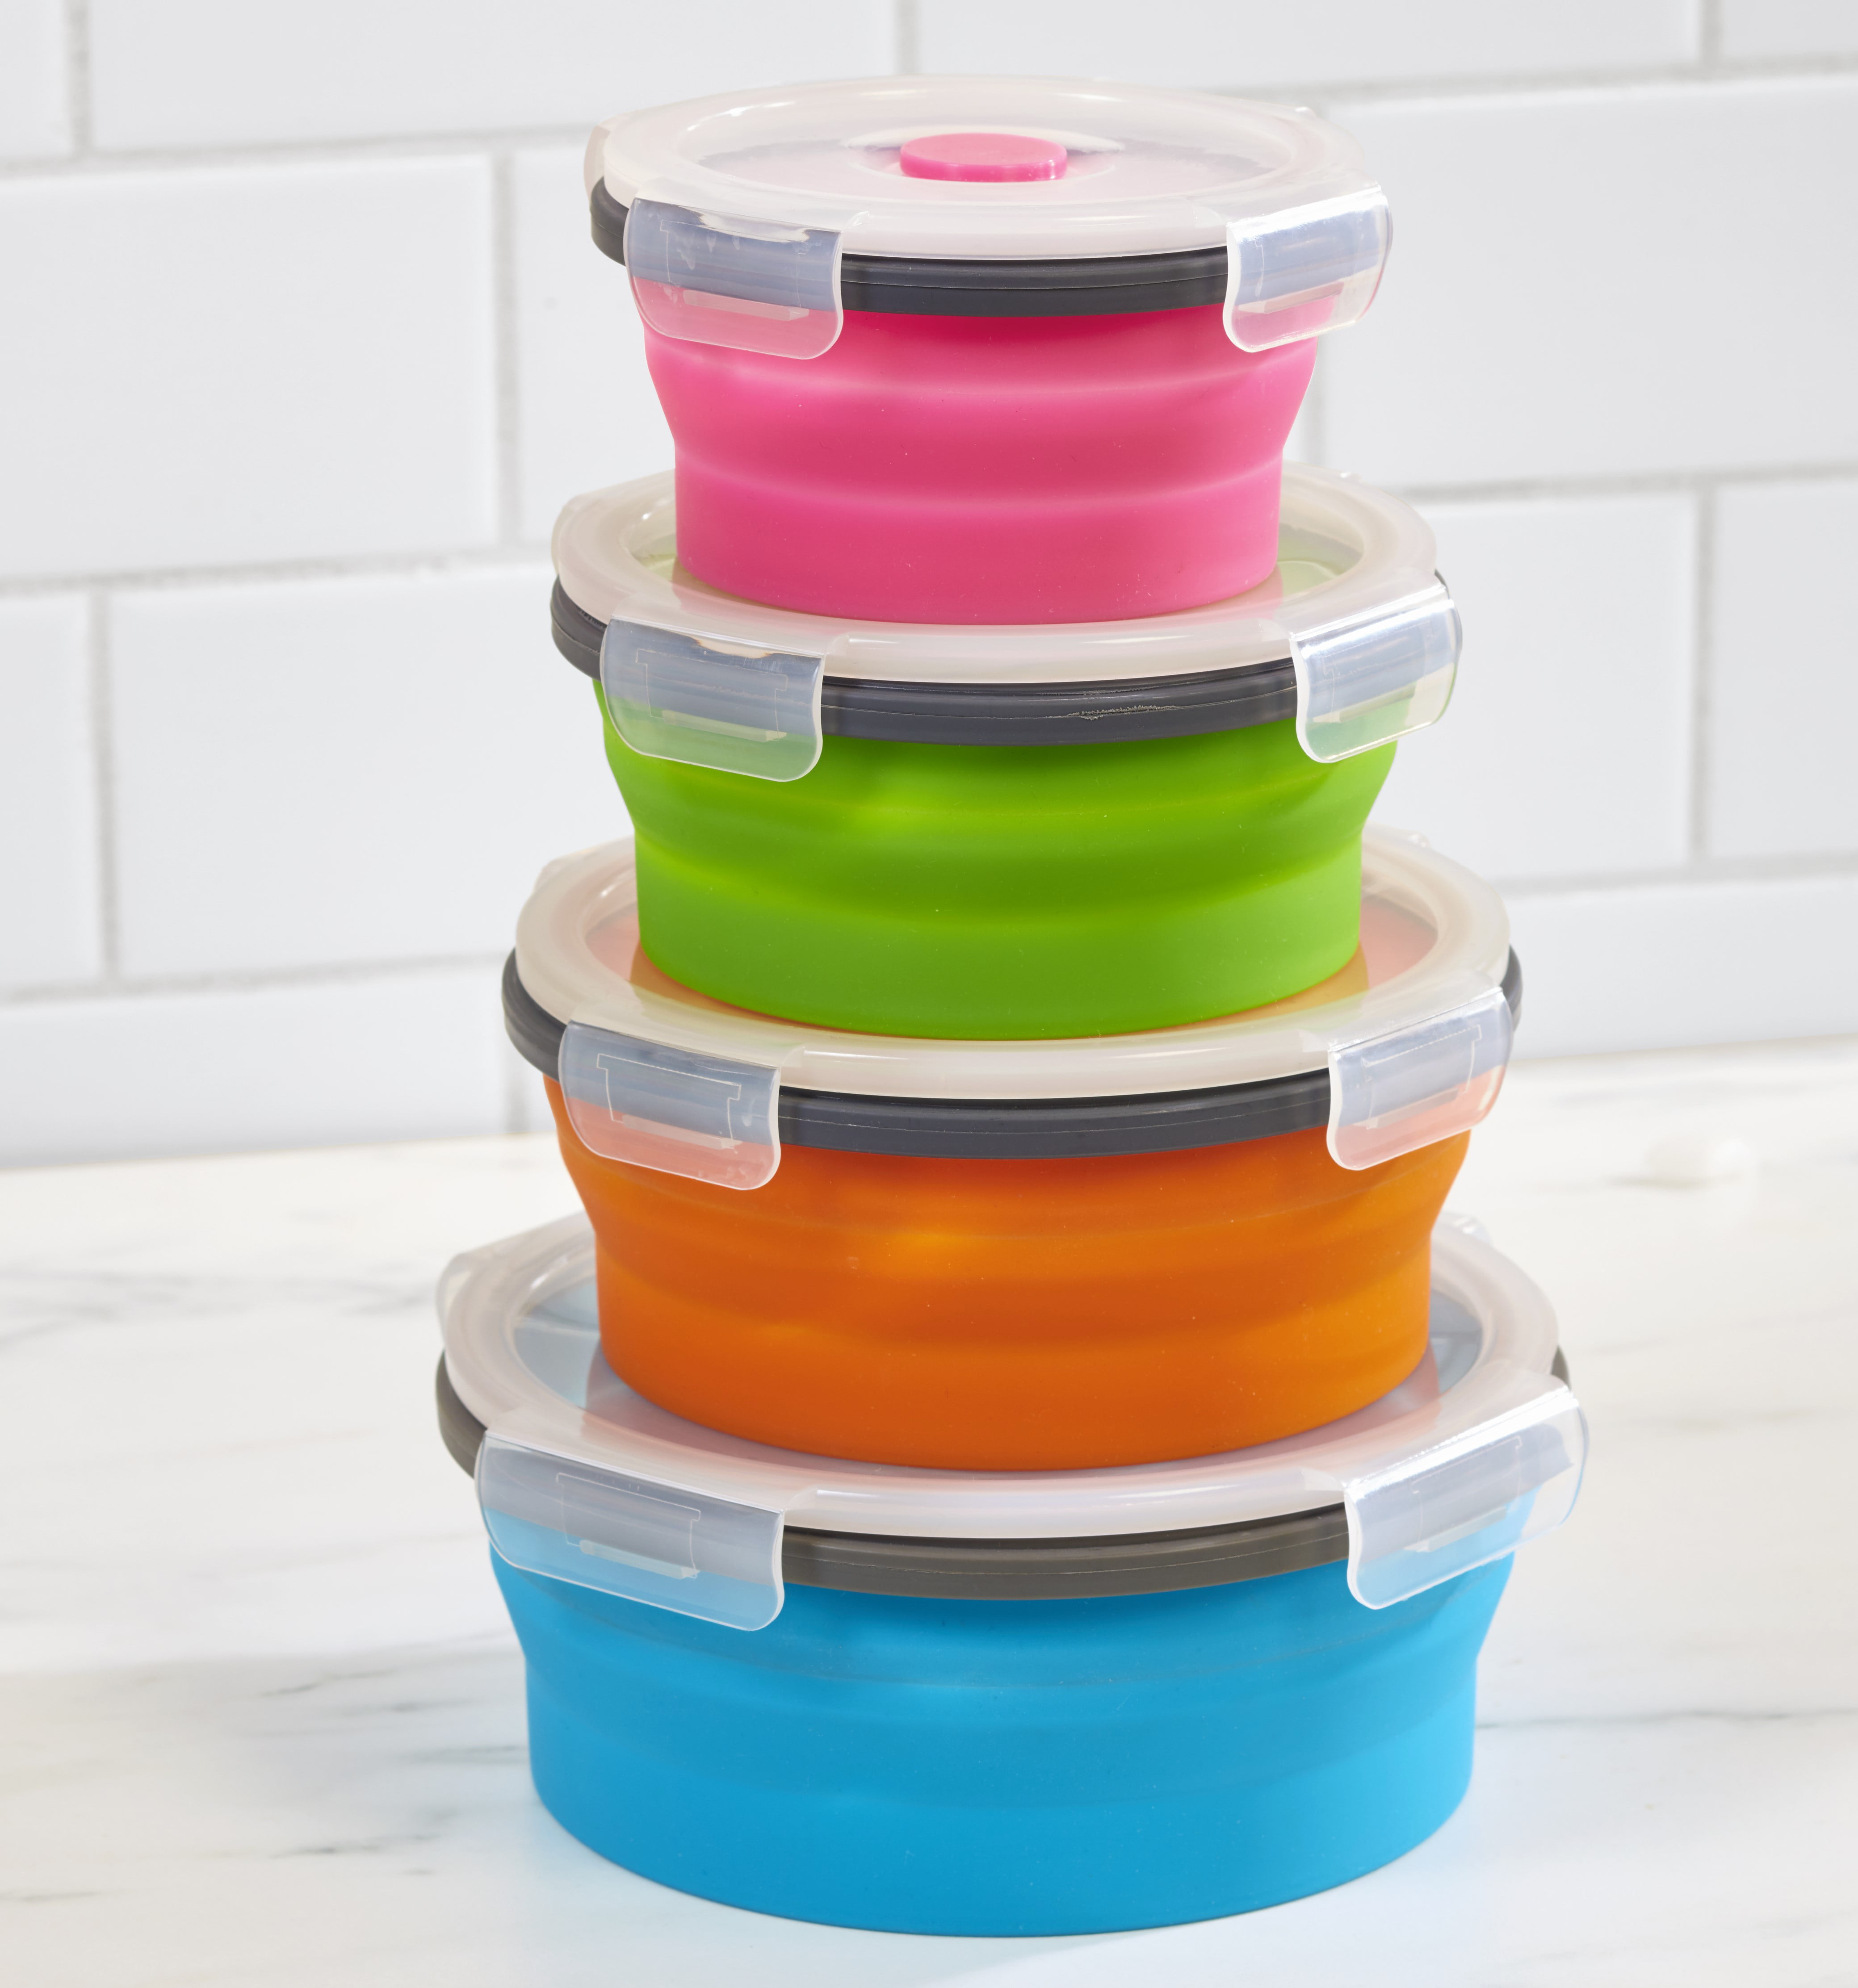 Thin Bins Collapsible Containers-Set of 4 Silicone Food Storage Contain X7H1 Details about   1X 